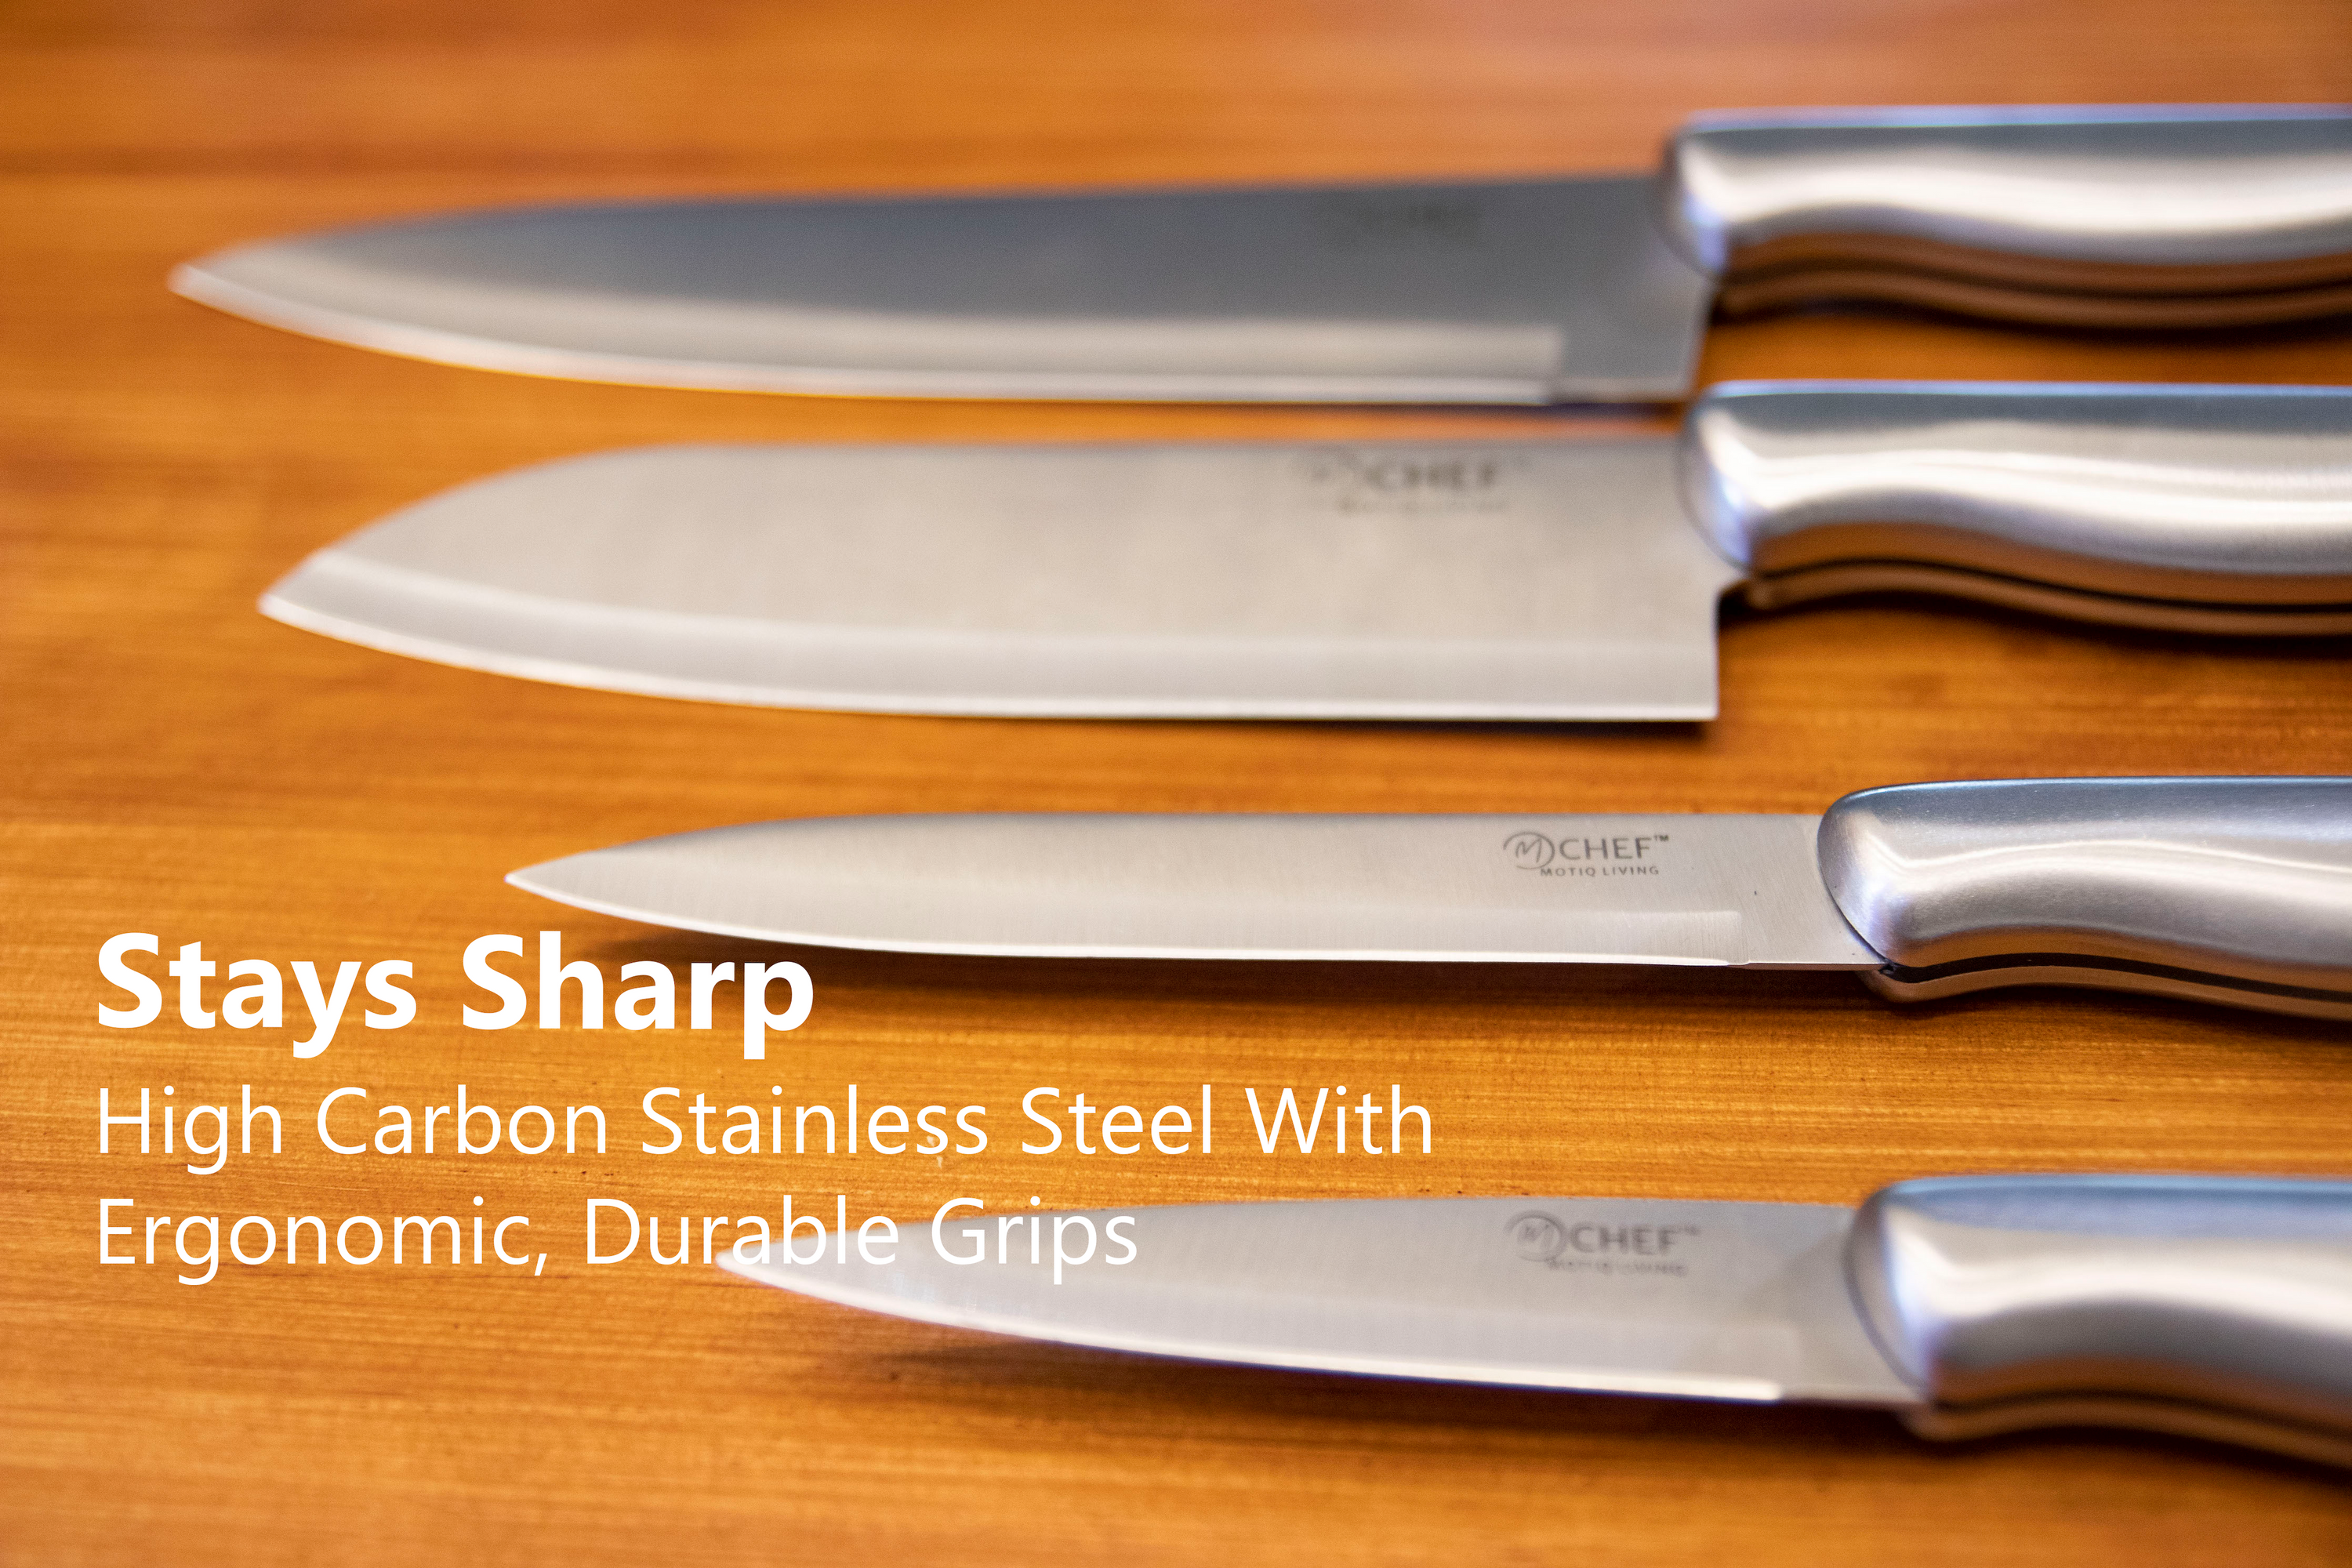 High Caron Stainless Steel Knives